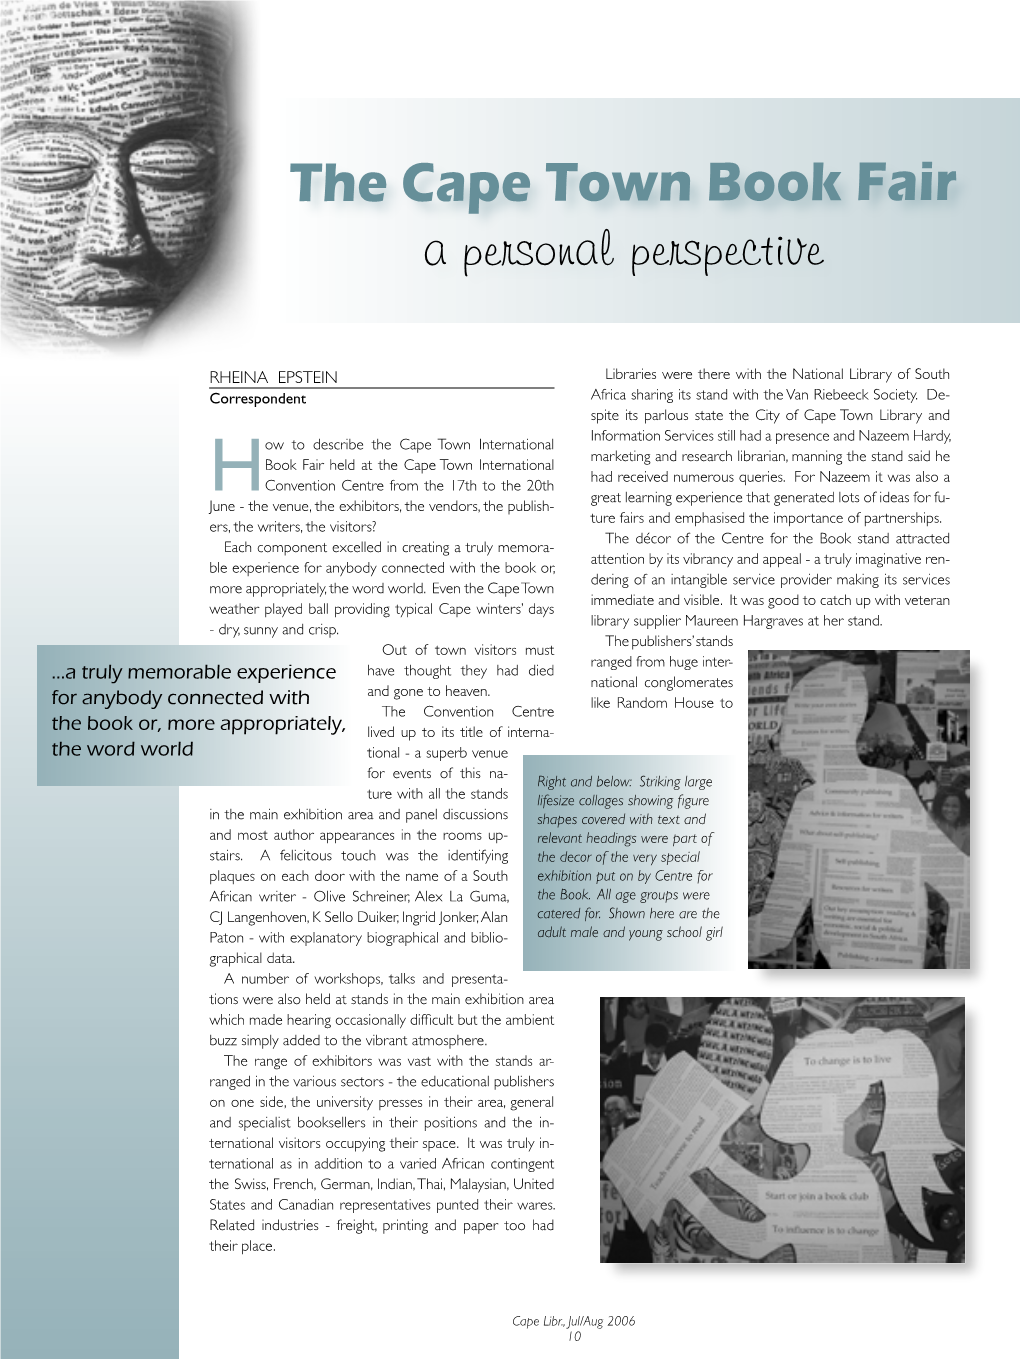 The Cape Town Book Fair a Personal Perspective